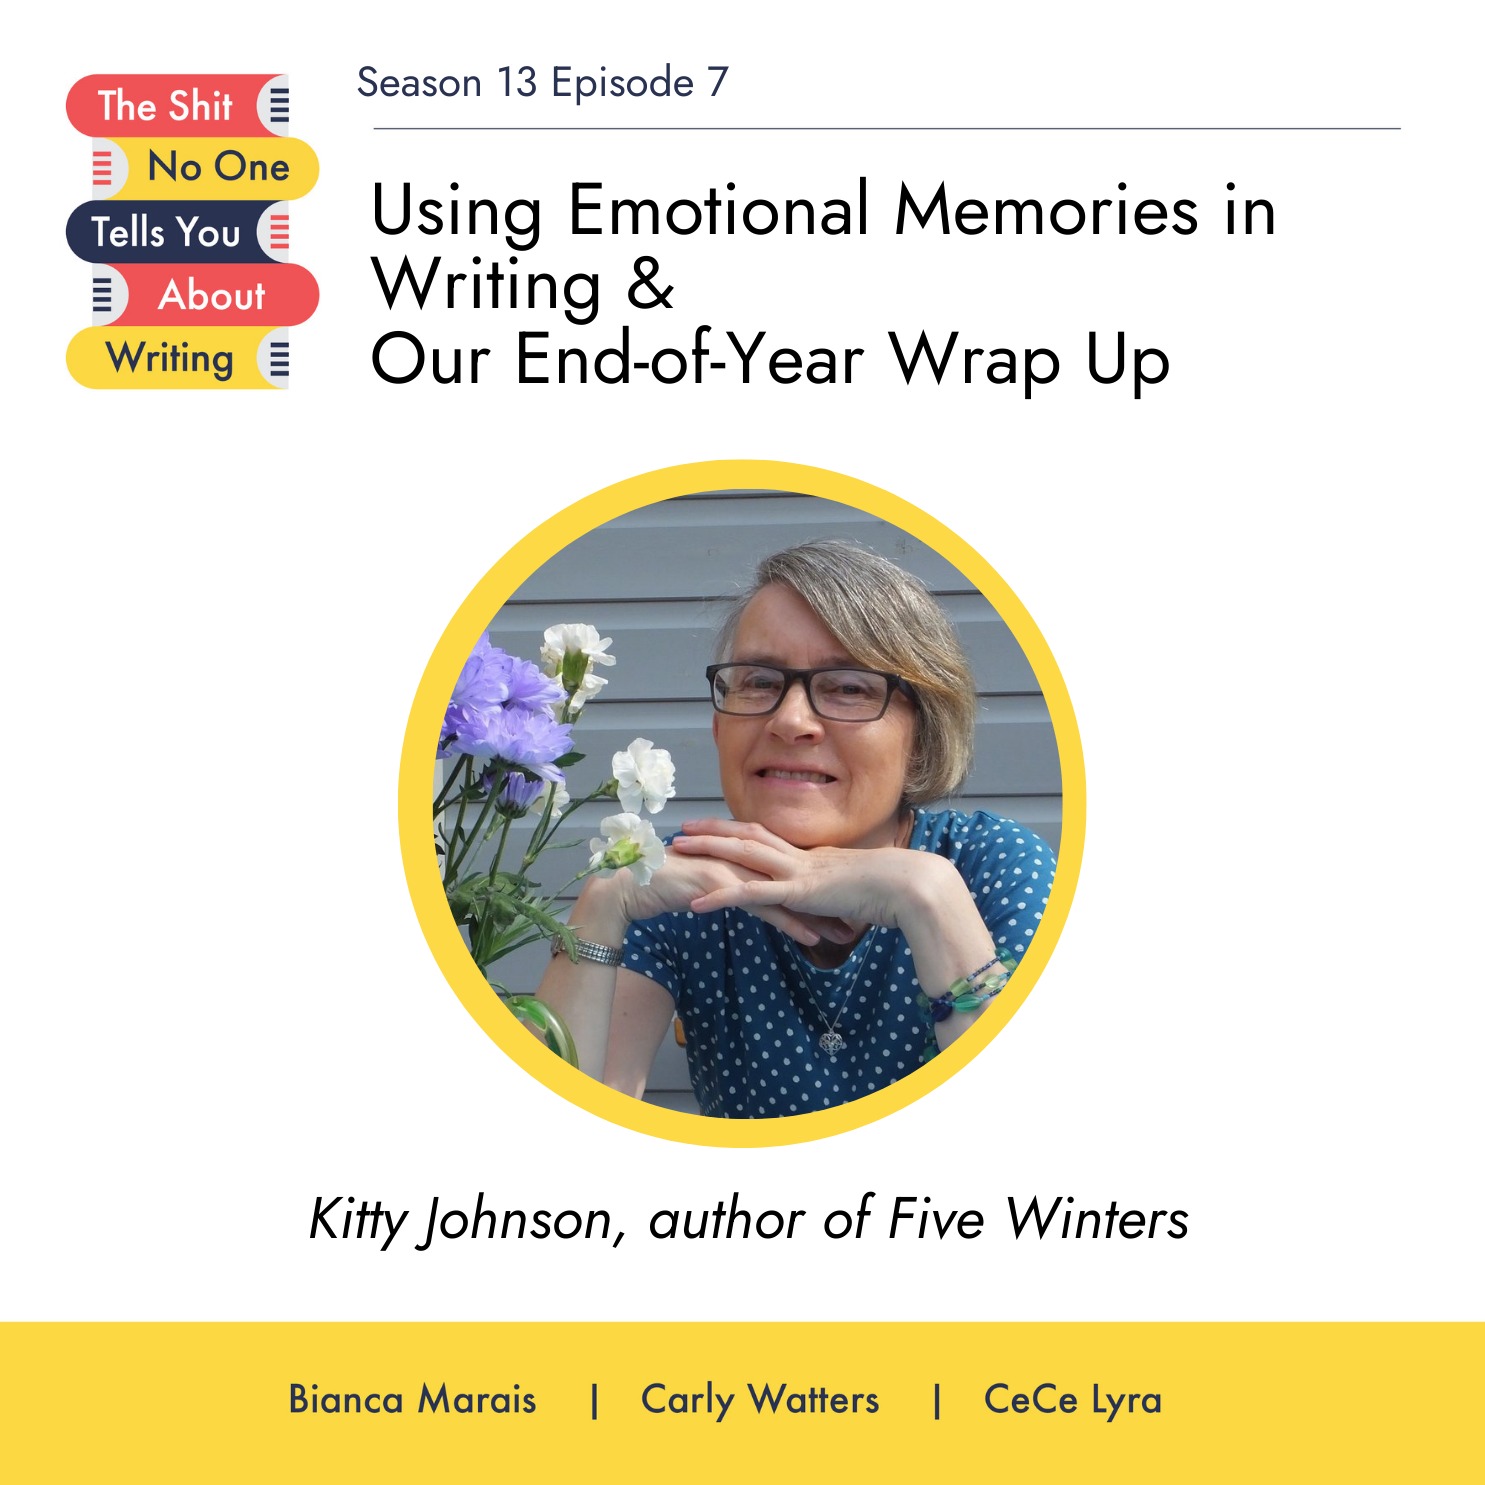 Using Emotional Memories in Writing & Our End-of-Year Wrap Up